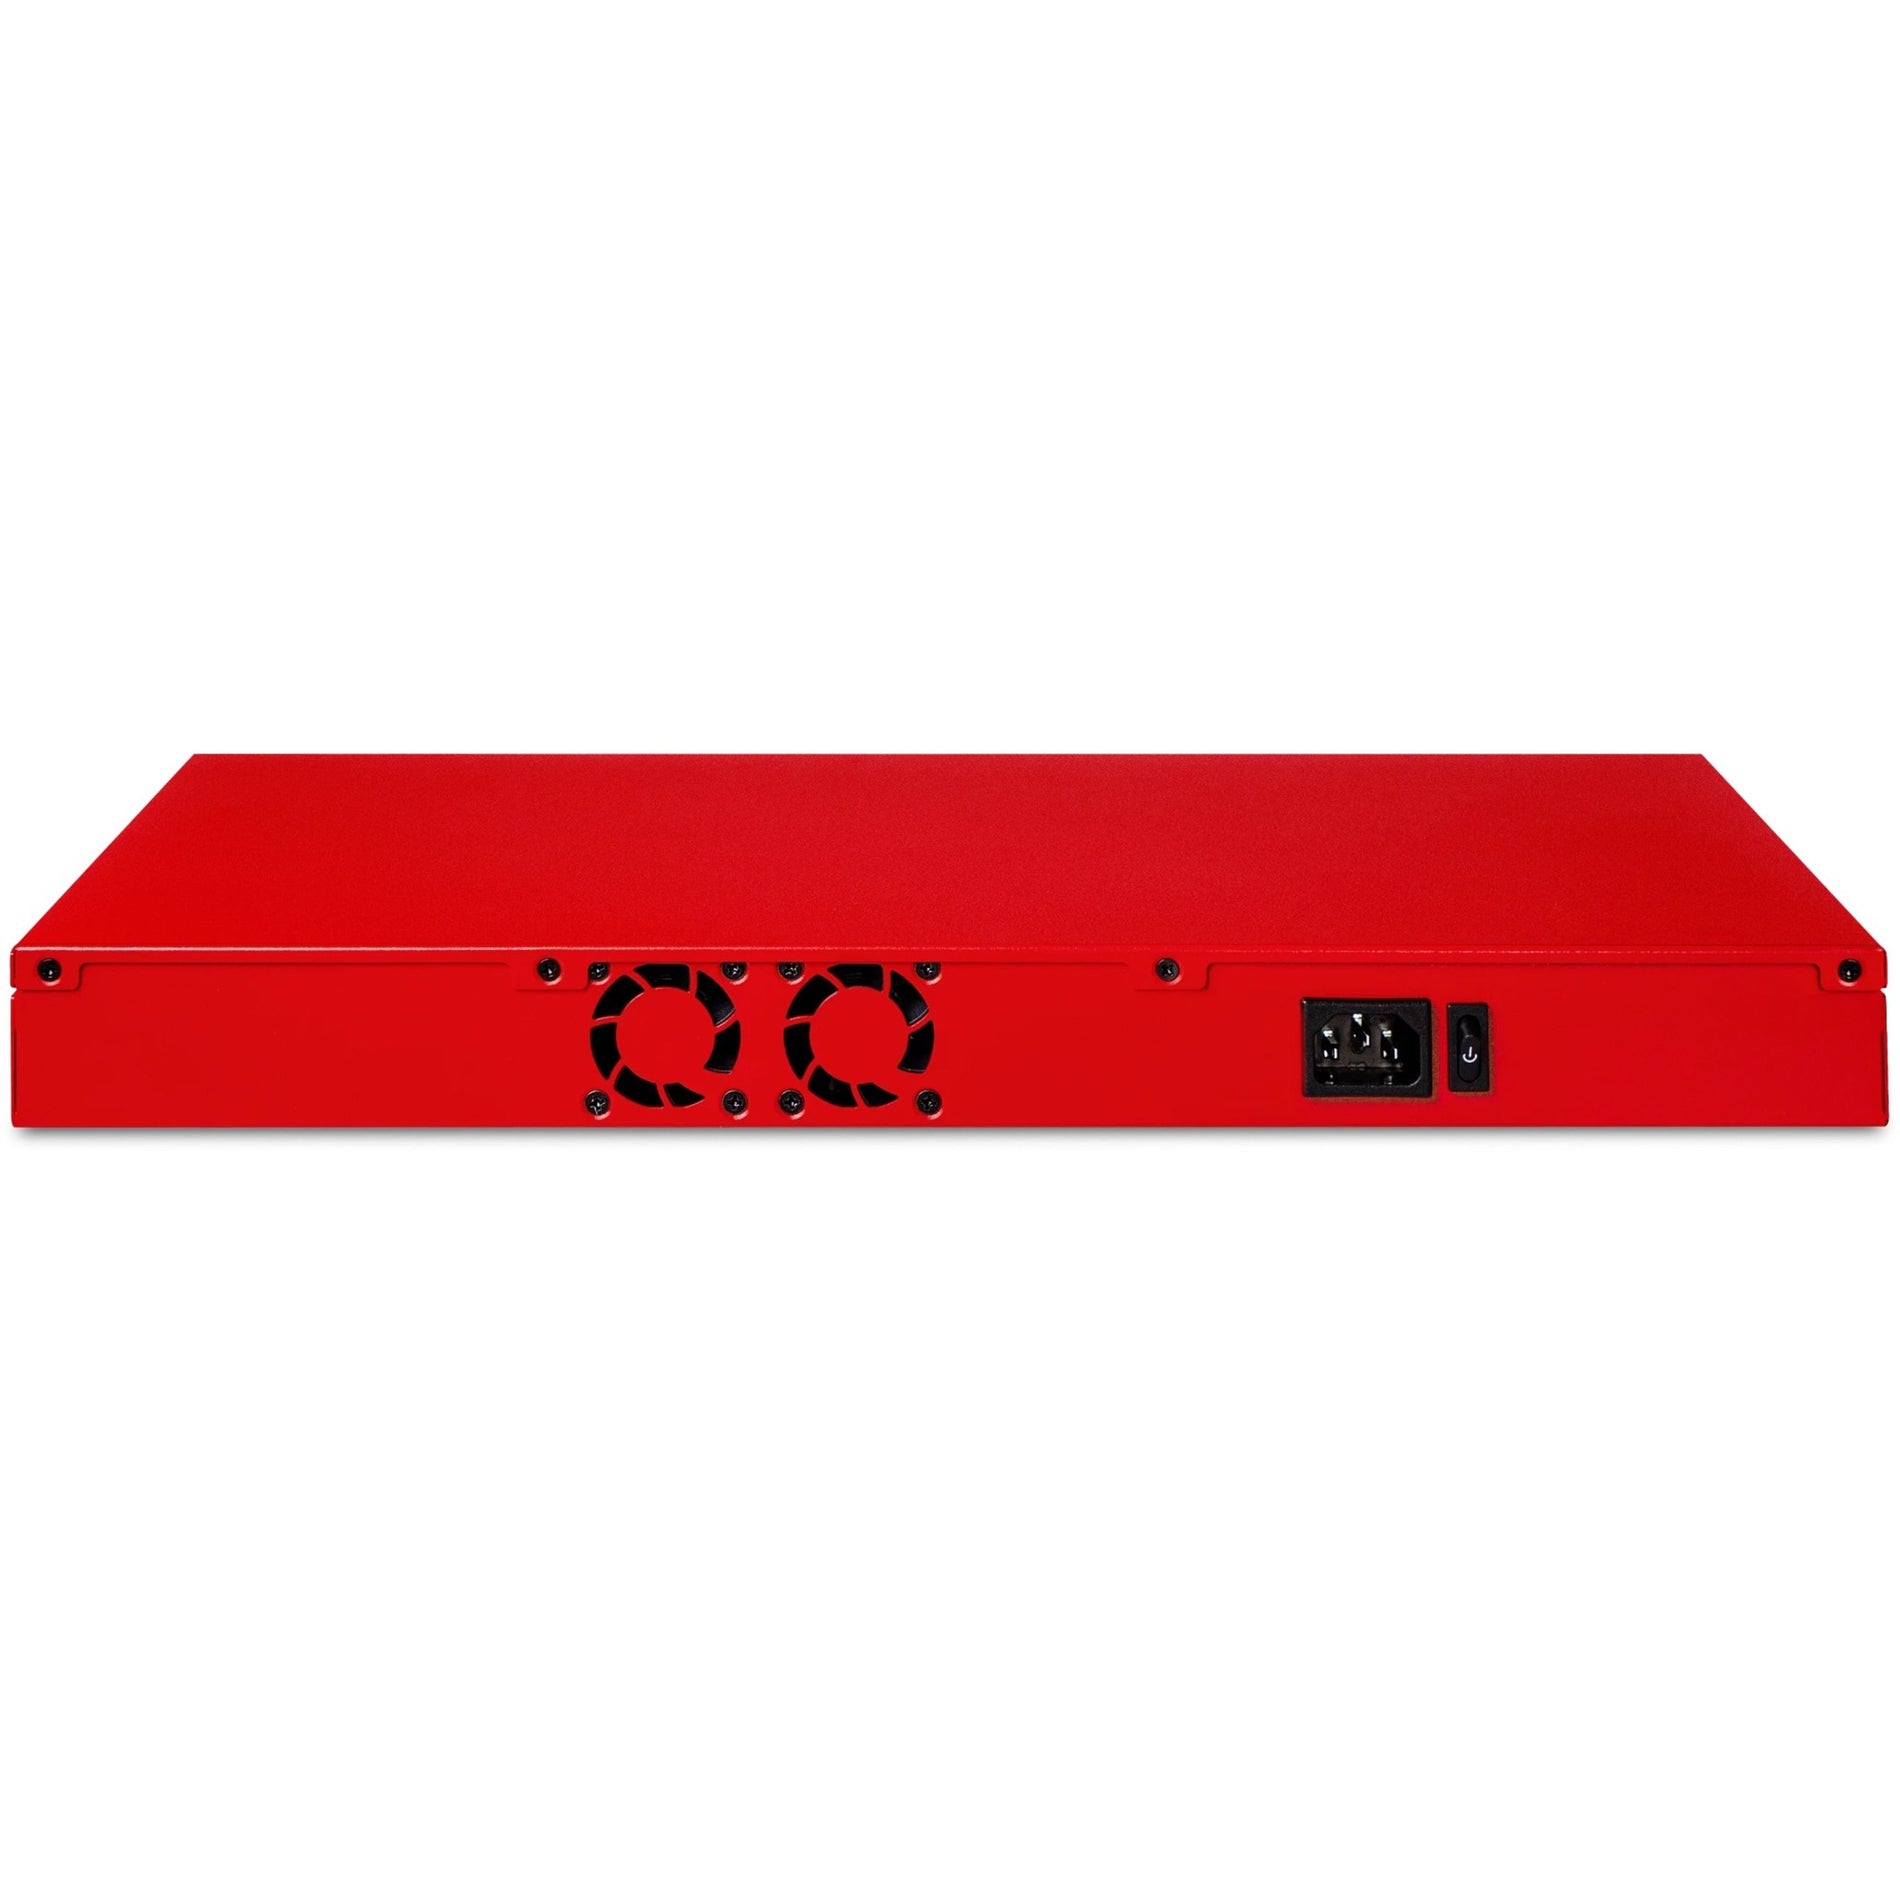 WatchGuard WGM29000701 Firebox M290 Network Security/Firewall Appliance, 8 Ports, 1 Year Basic Security Suite